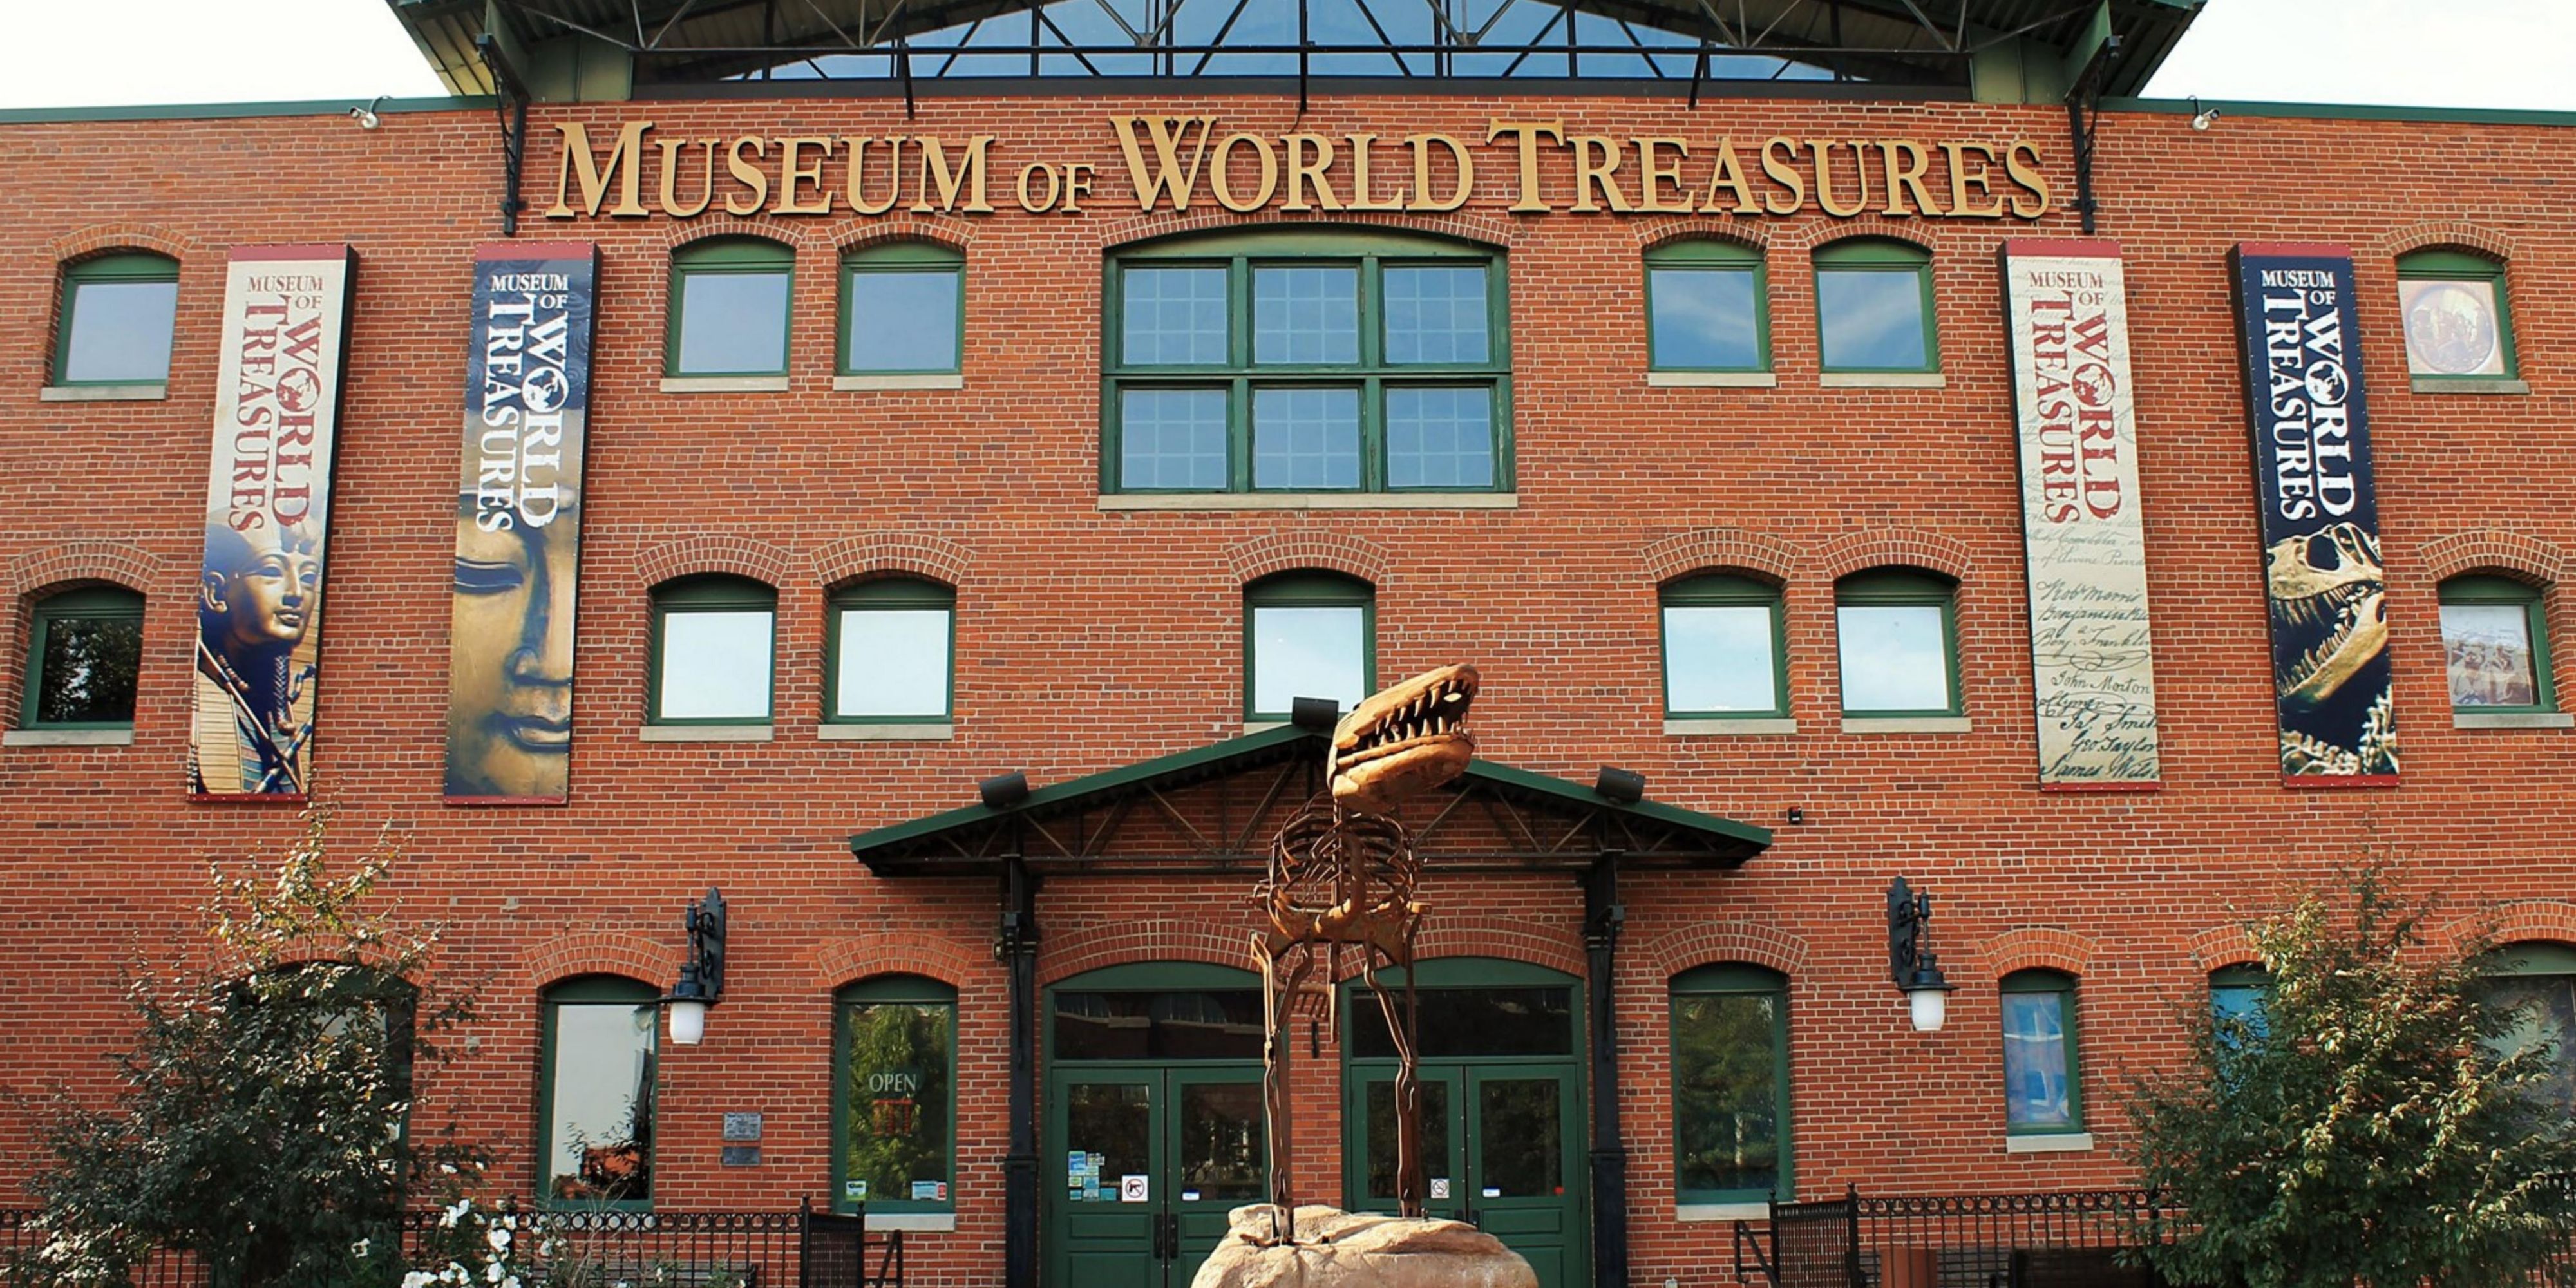 Discover stories of crusty bones and long-lost creatures, marvel at Egyptian mummies, uncover the secrets of ancient civilizations and enter the battlefields of World Wars. The Museum of World Treasures has three floors of exhibits and surprises around every corner, you'll unlock the stories of the past.